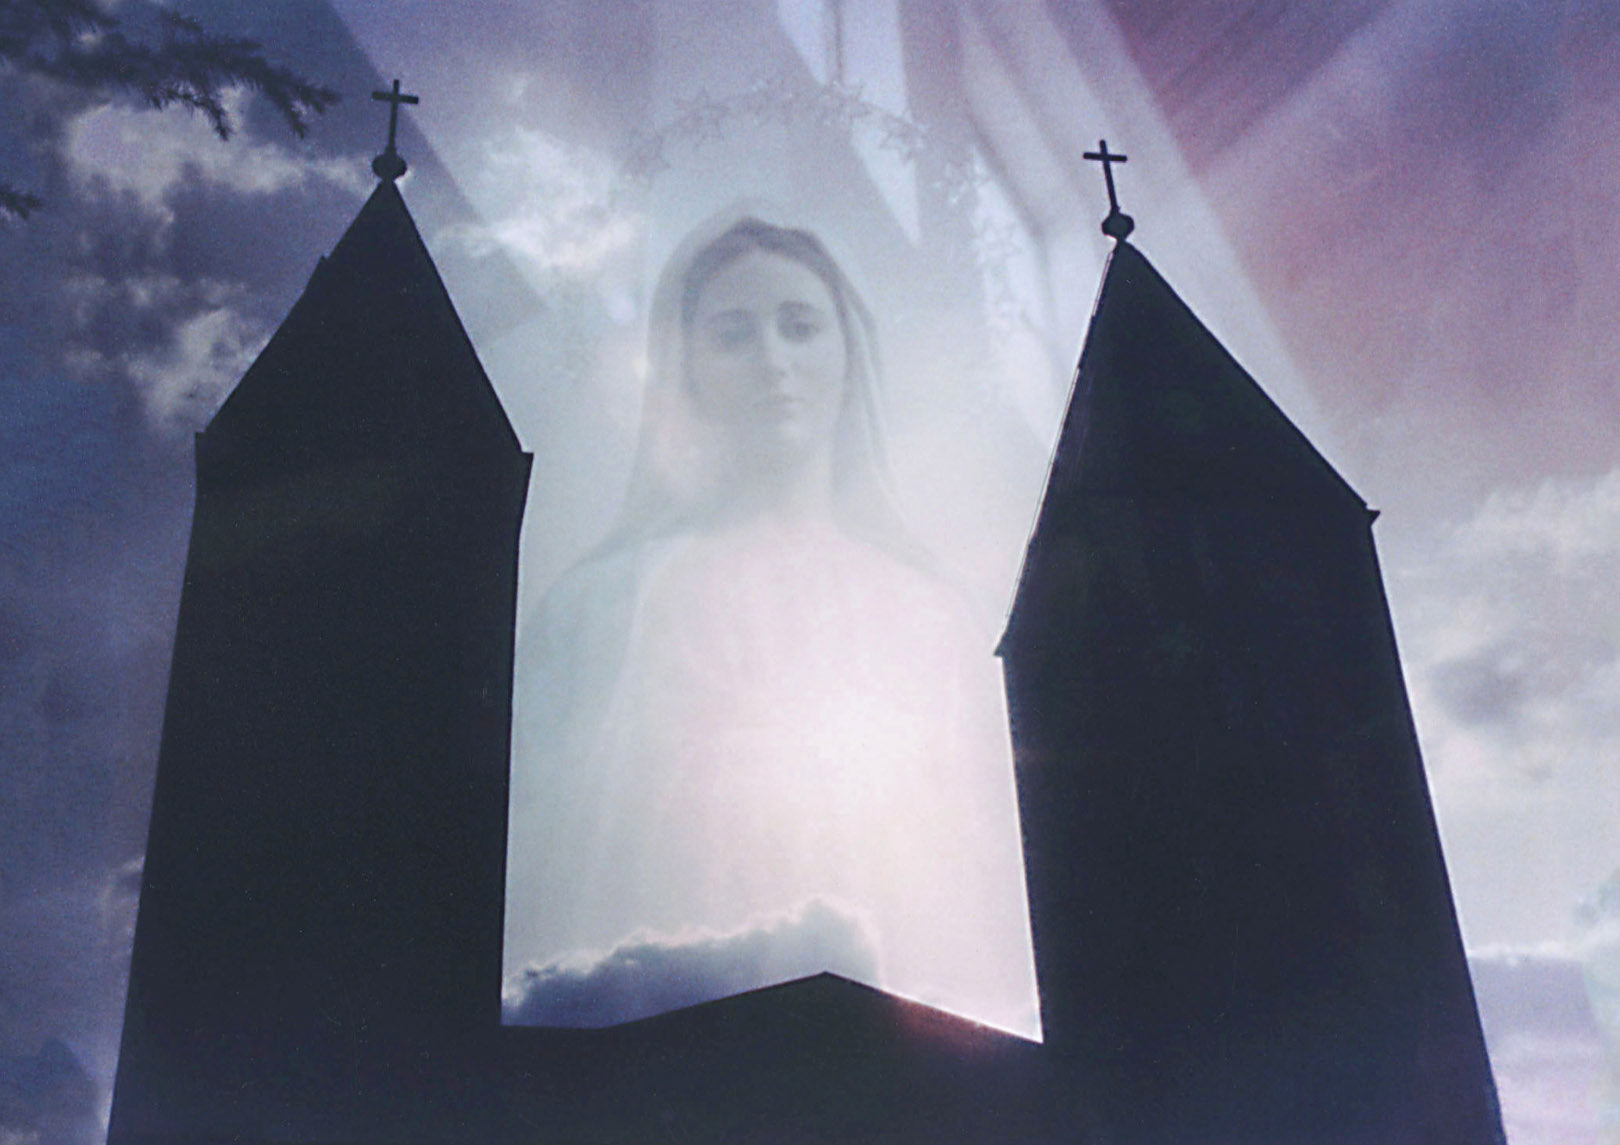 Our Lady of Medjugorje St. James Church